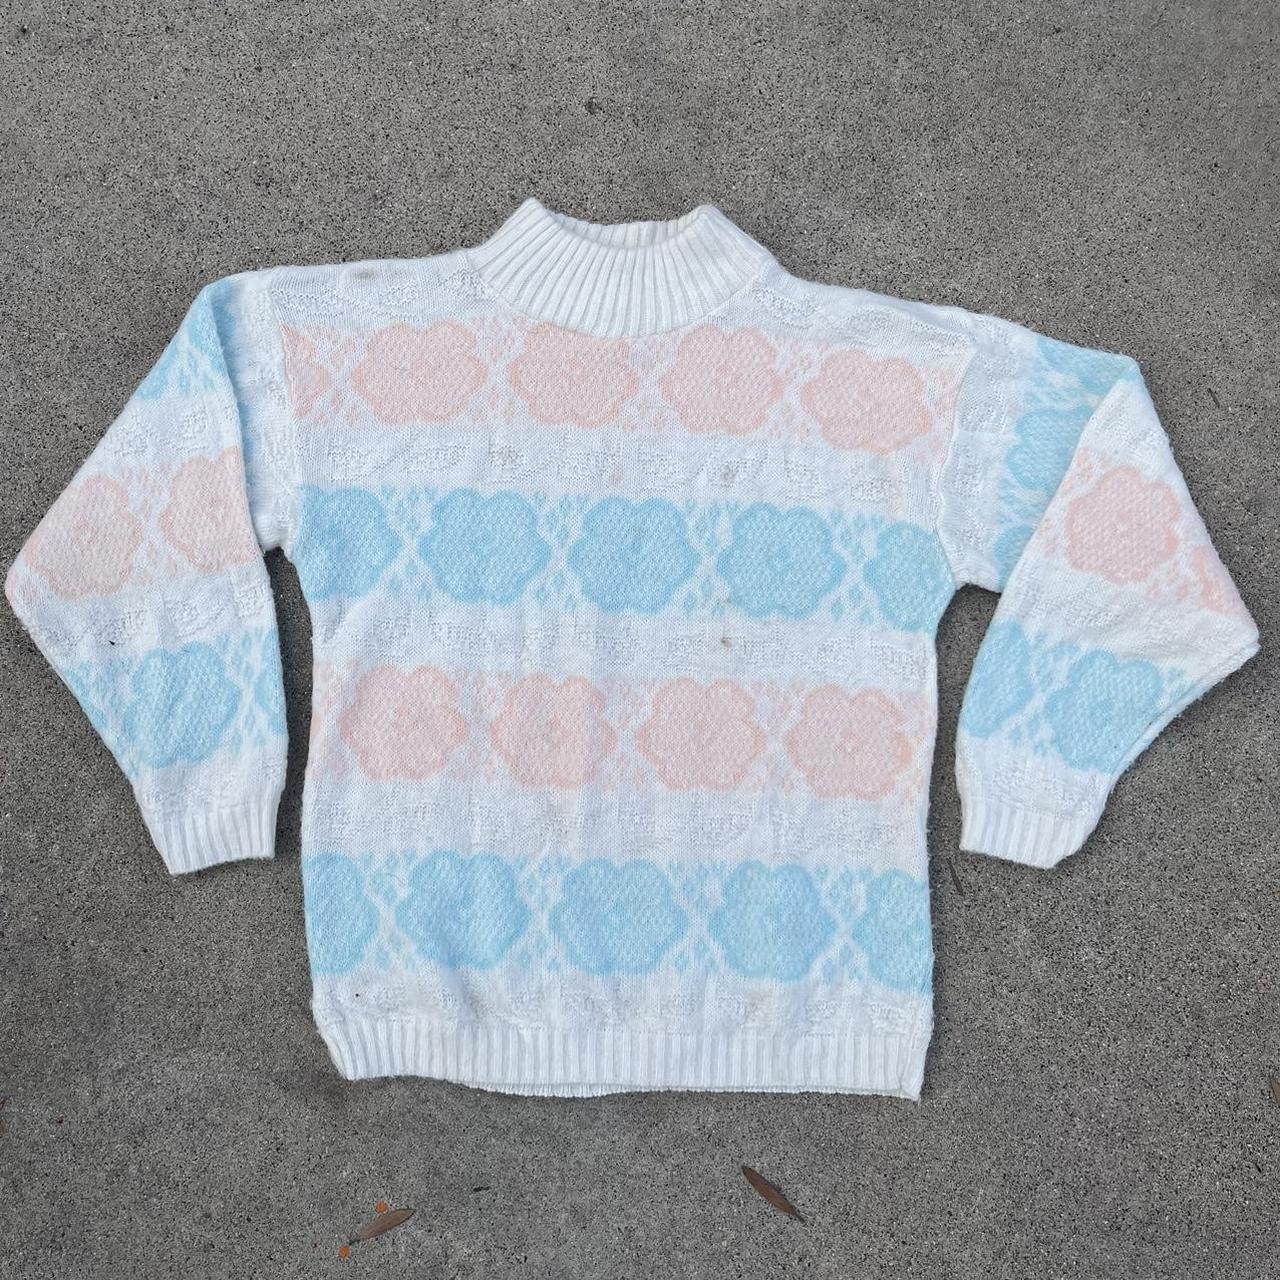 Vintage 80’s / 90’s floral knit sweater! This pastel...